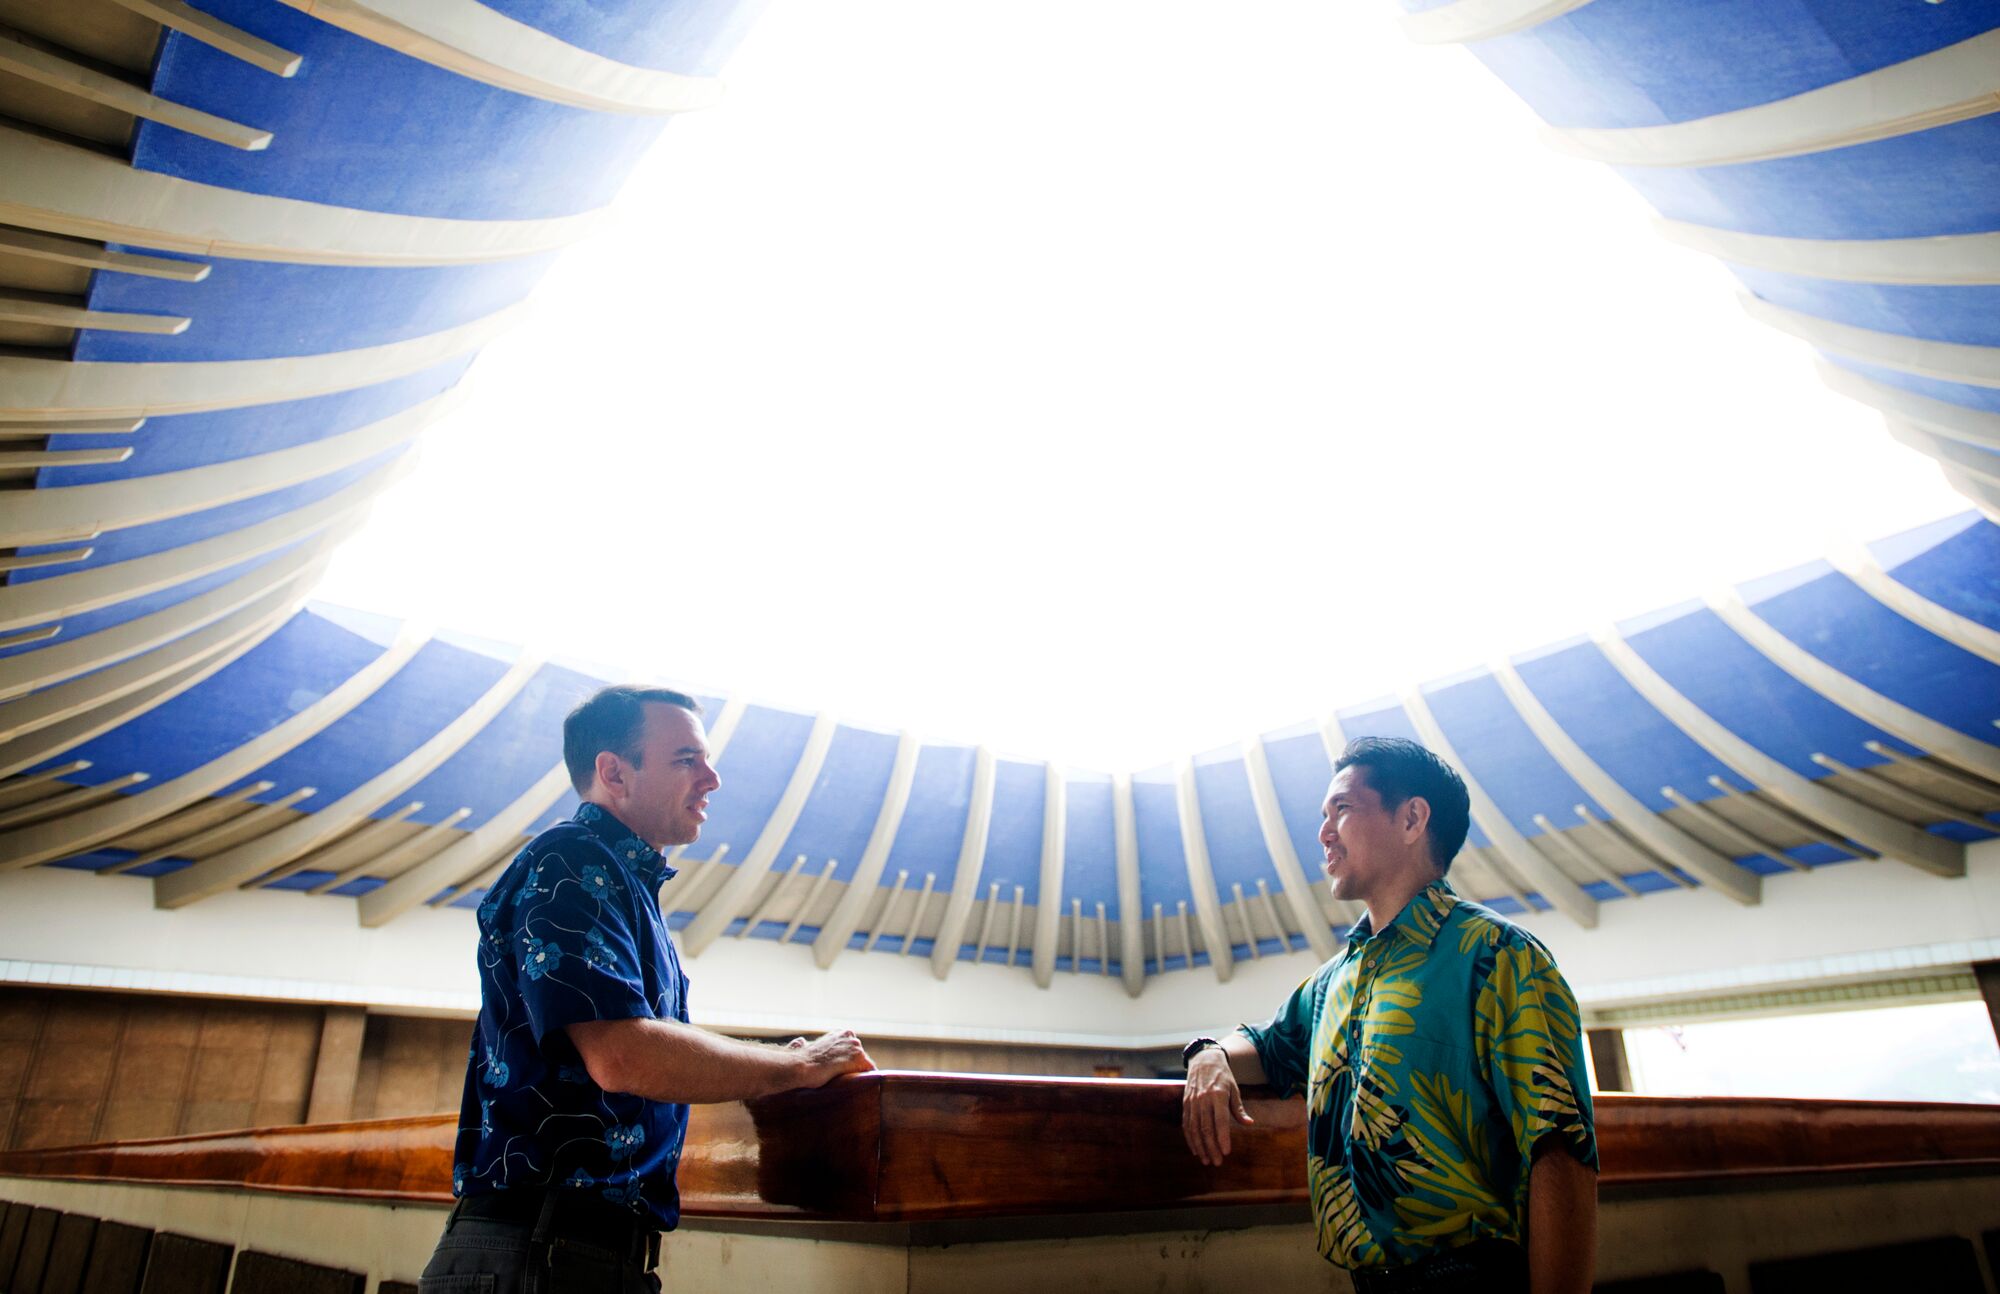 Isaac Moriwake (right), managing attorney of the Mid-Pacific Office, speaks with Mark Duda, a solar industry leader and longtime Earthjustice partner, in Hawaiʻi’s State Capitol.